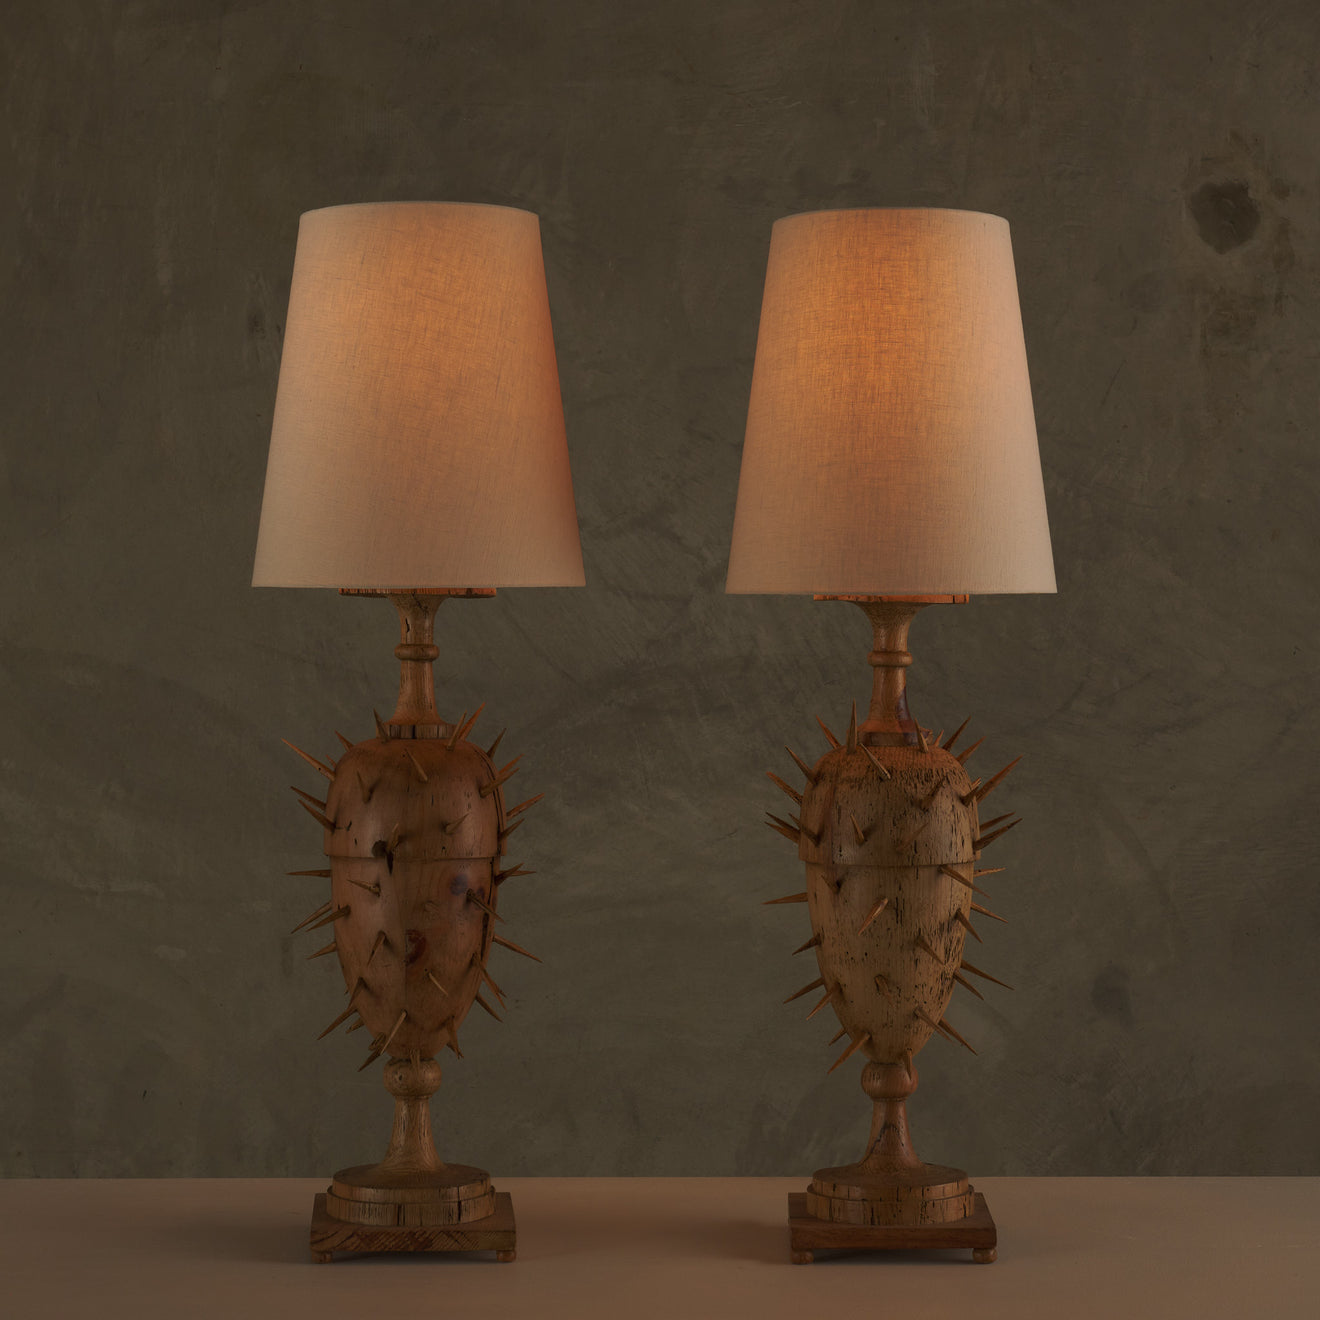 ERIZO TABLE LAMP(s) BY MIKE DIAZ